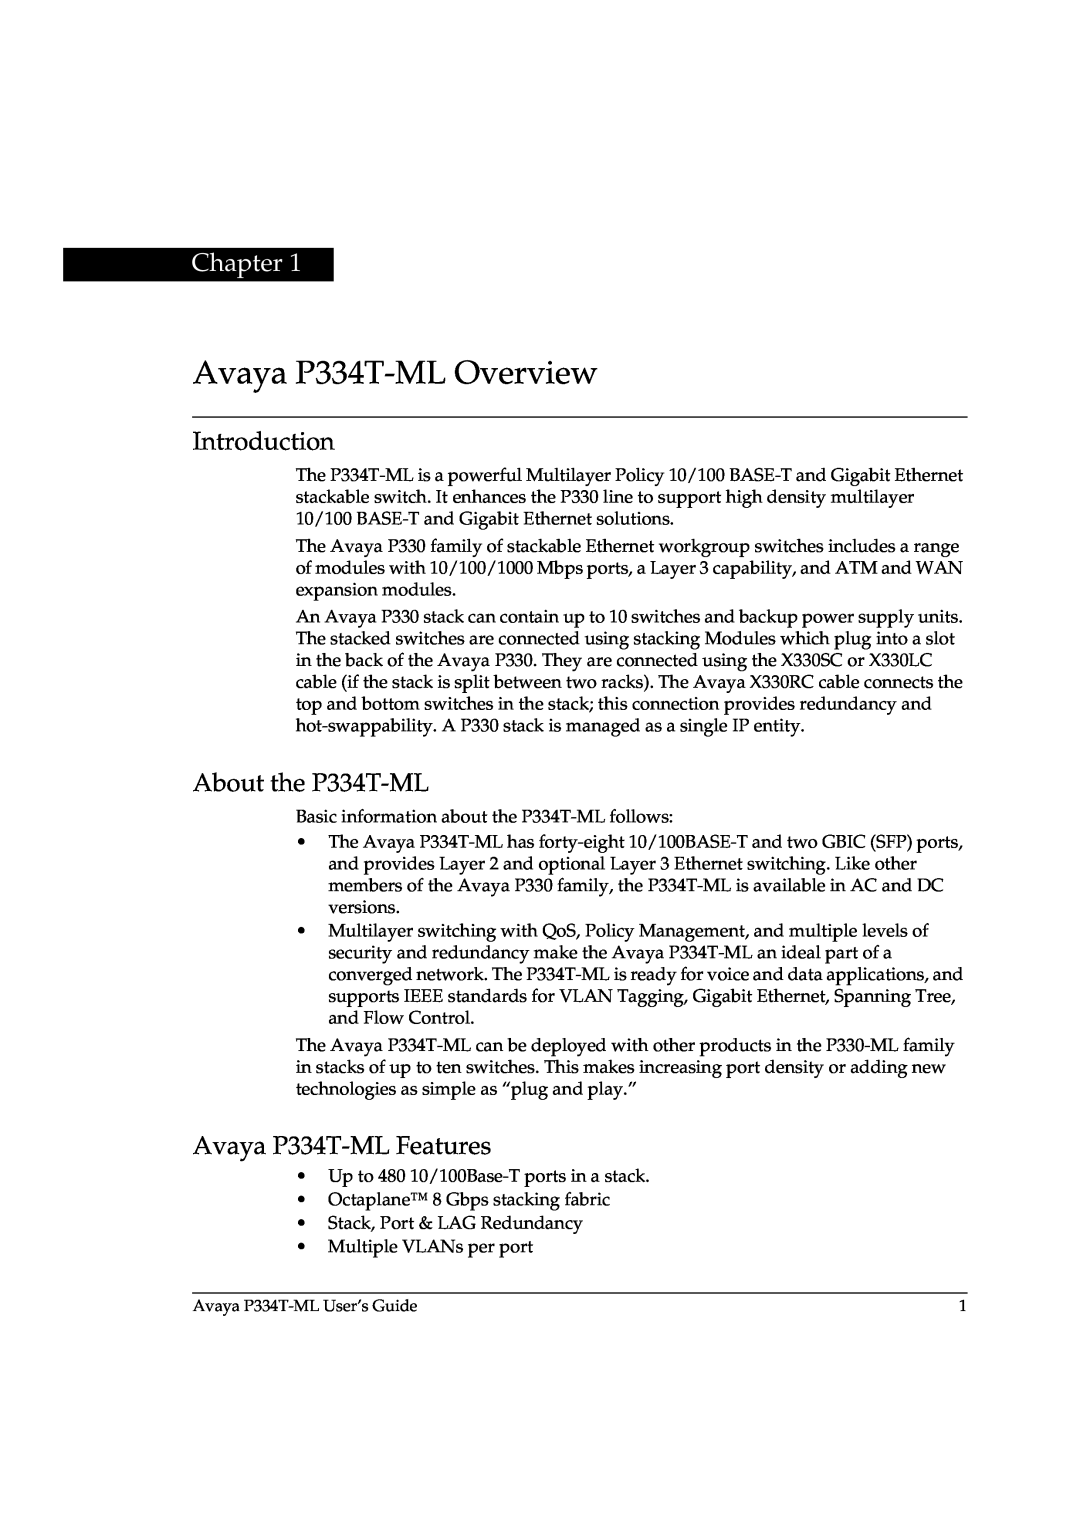 Avaya P3343T-ML manual Avaya P334T-ML Overview, Chapter, Introduction, About the P334T-ML, Avaya P334T-ML Features 